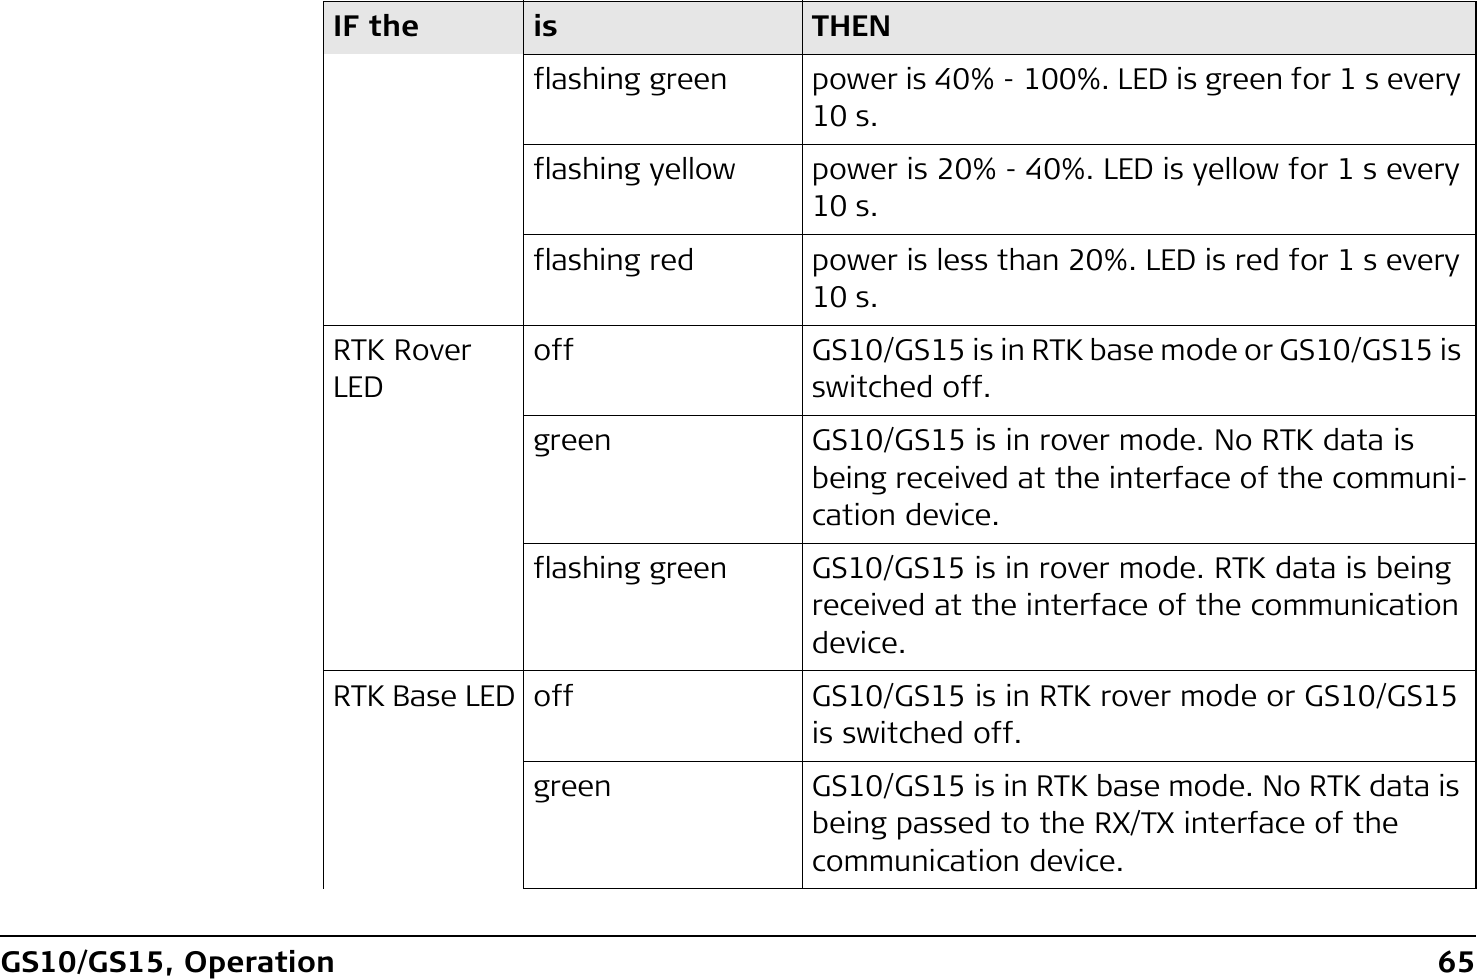 GS10/GS15, Operation 65flashing green power is 40% - 100%. LED is green for 1 s every 10 s.flashing yellow power is 20% - 40%. LED is yellow for 1 s every 10 s.flashing red power is less than 20%. LED is red for 1 s every 10 s.RTK Rover LEDoff GS10/GS15 is in RTK base mode or GS10/GS15 is switched off.green GS10/GS15 is in rover mode. No RTK data is being received at the interface of the communi-cation device.flashing green GS10/GS15 is in rover mode. RTK data is being received at the interface of the communication device.RTK Base LED off GS10/GS15 is in RTK rover mode or GS10/GS15 is switched off.green GS10/GS15 is in RTK base mode. No RTK data is being passed to the RX/TX interface of the communication device.IF the is THEN